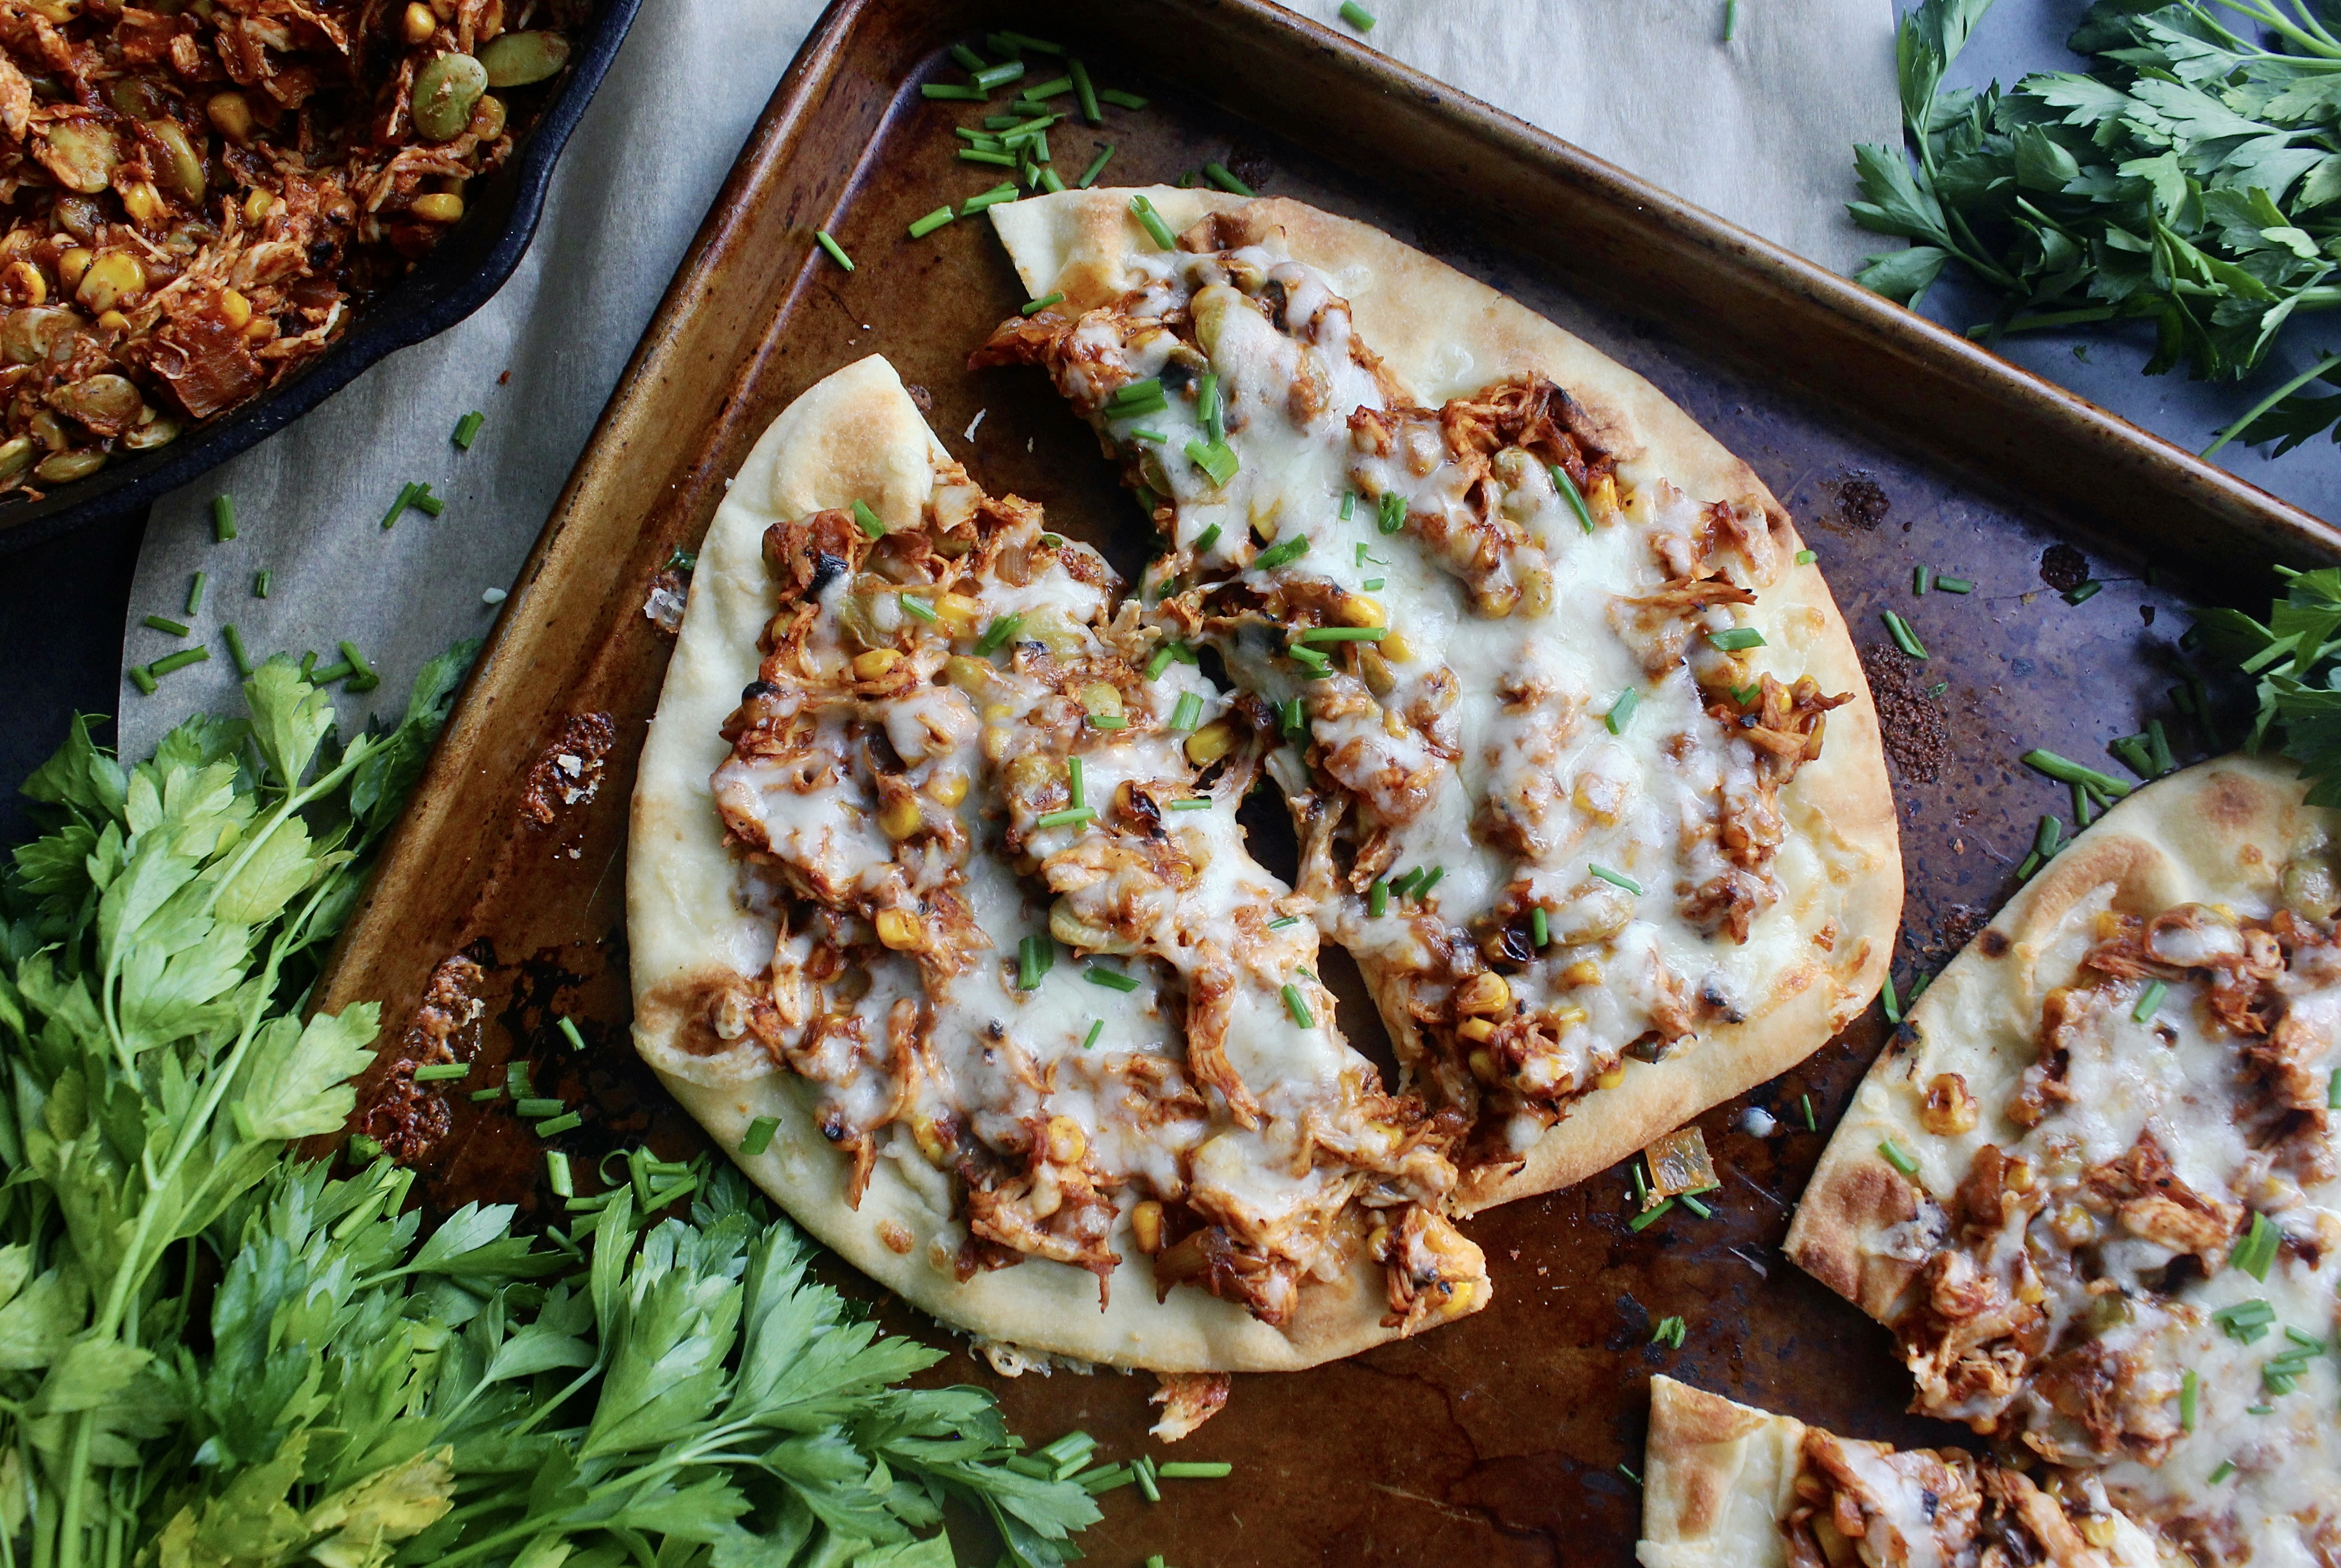 Plushy and toasty Naan flatbreads layered with saucy Brunswick stew style pulled meat and veggies: these Southern Brunswick Stew Naan Flatbreads are the ultimate twist on the classic stew!!